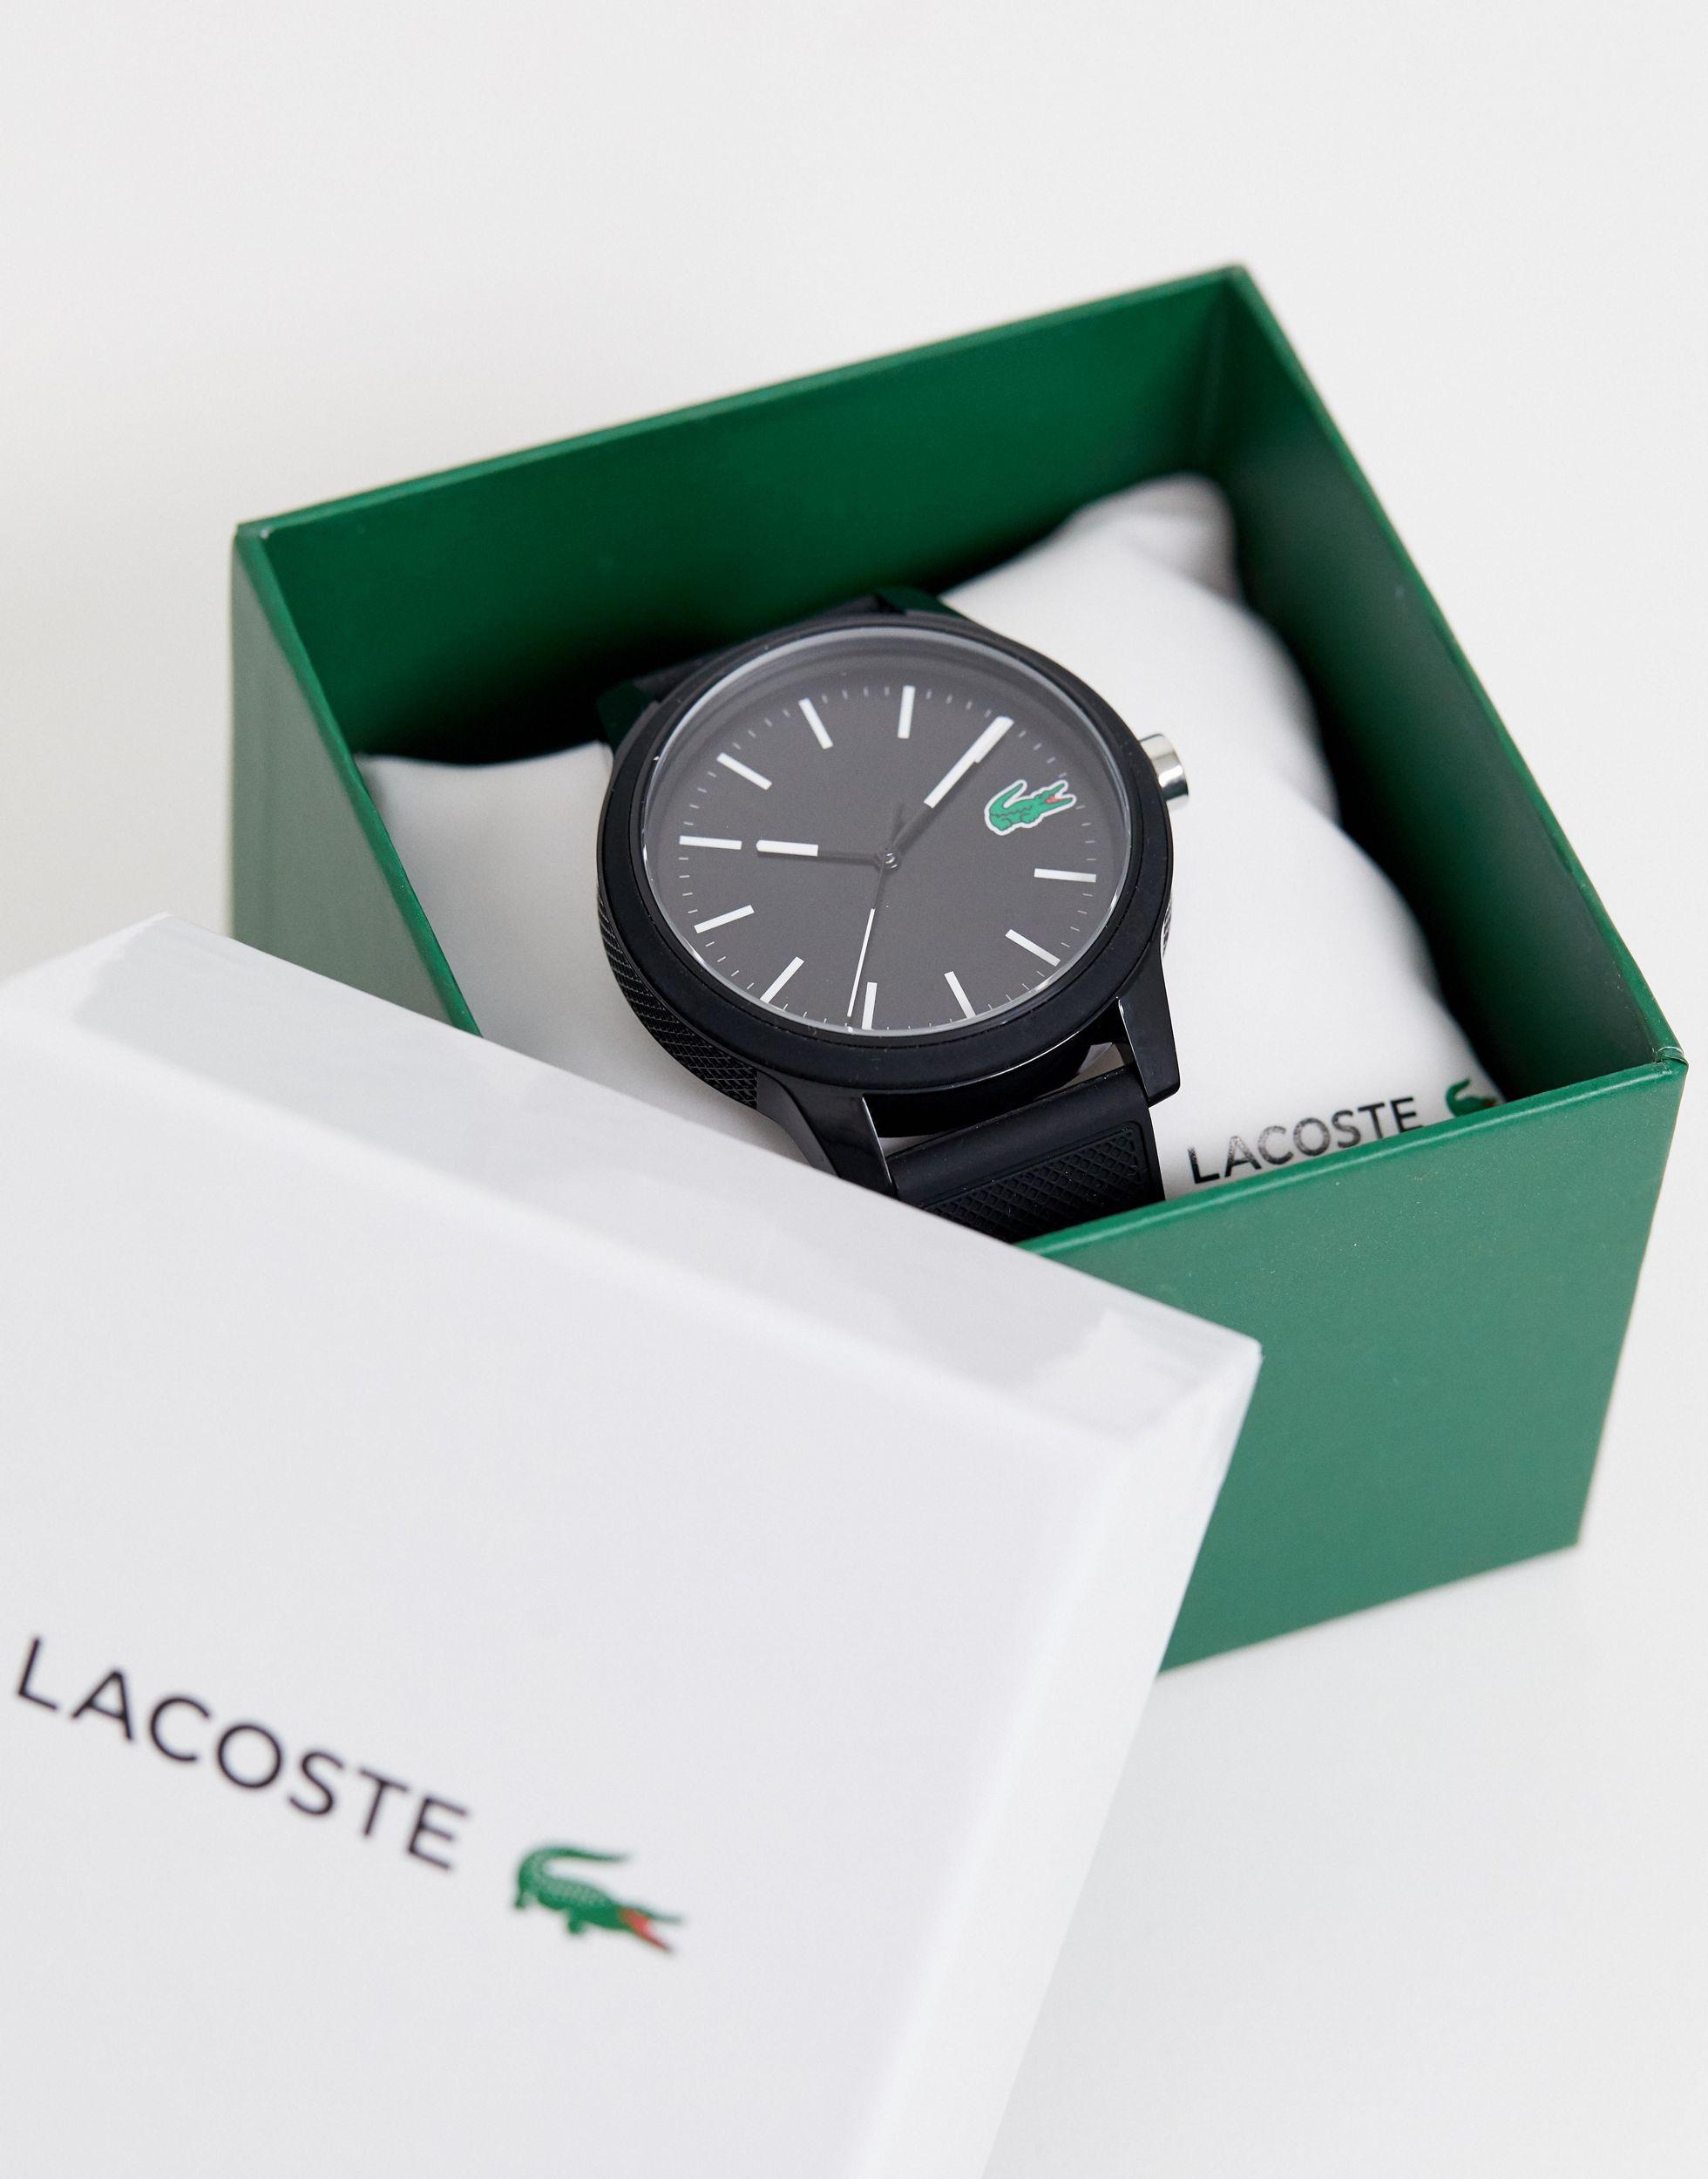 Lacoste 12.12 Silicone Watch in Black for Men - Save 13%